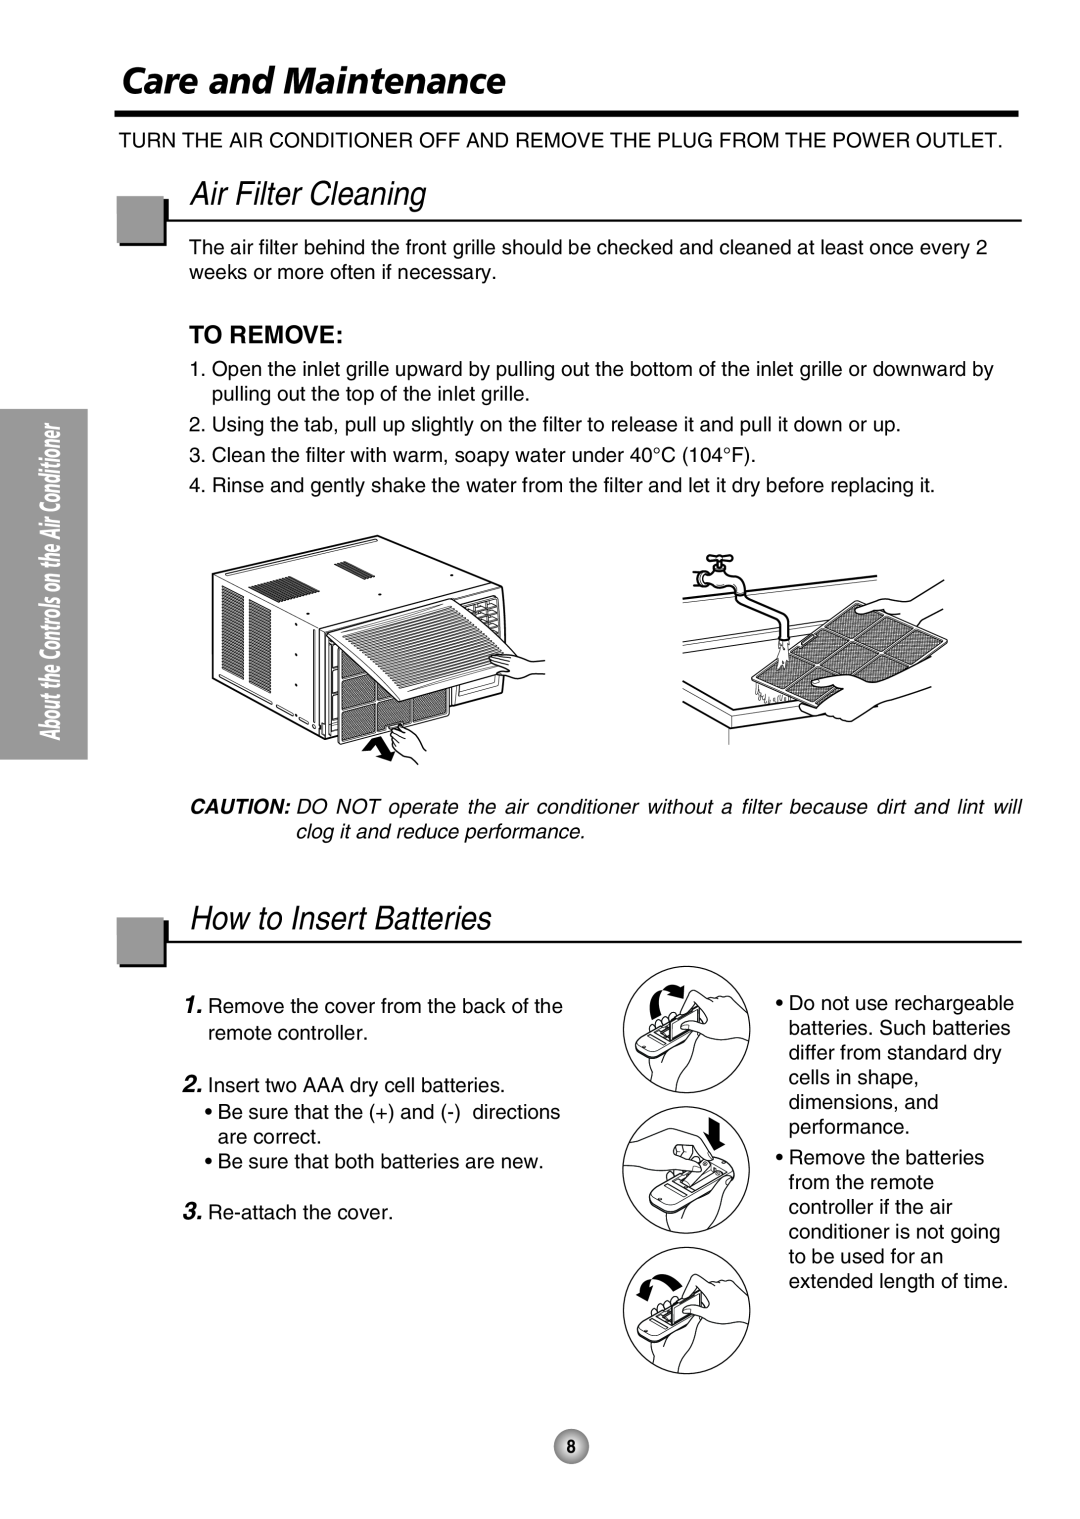 Panasonic CW-XC80HU manual Care and Maintenance, Air Filter Cleaning, How to Insert Batteries, To Remove 